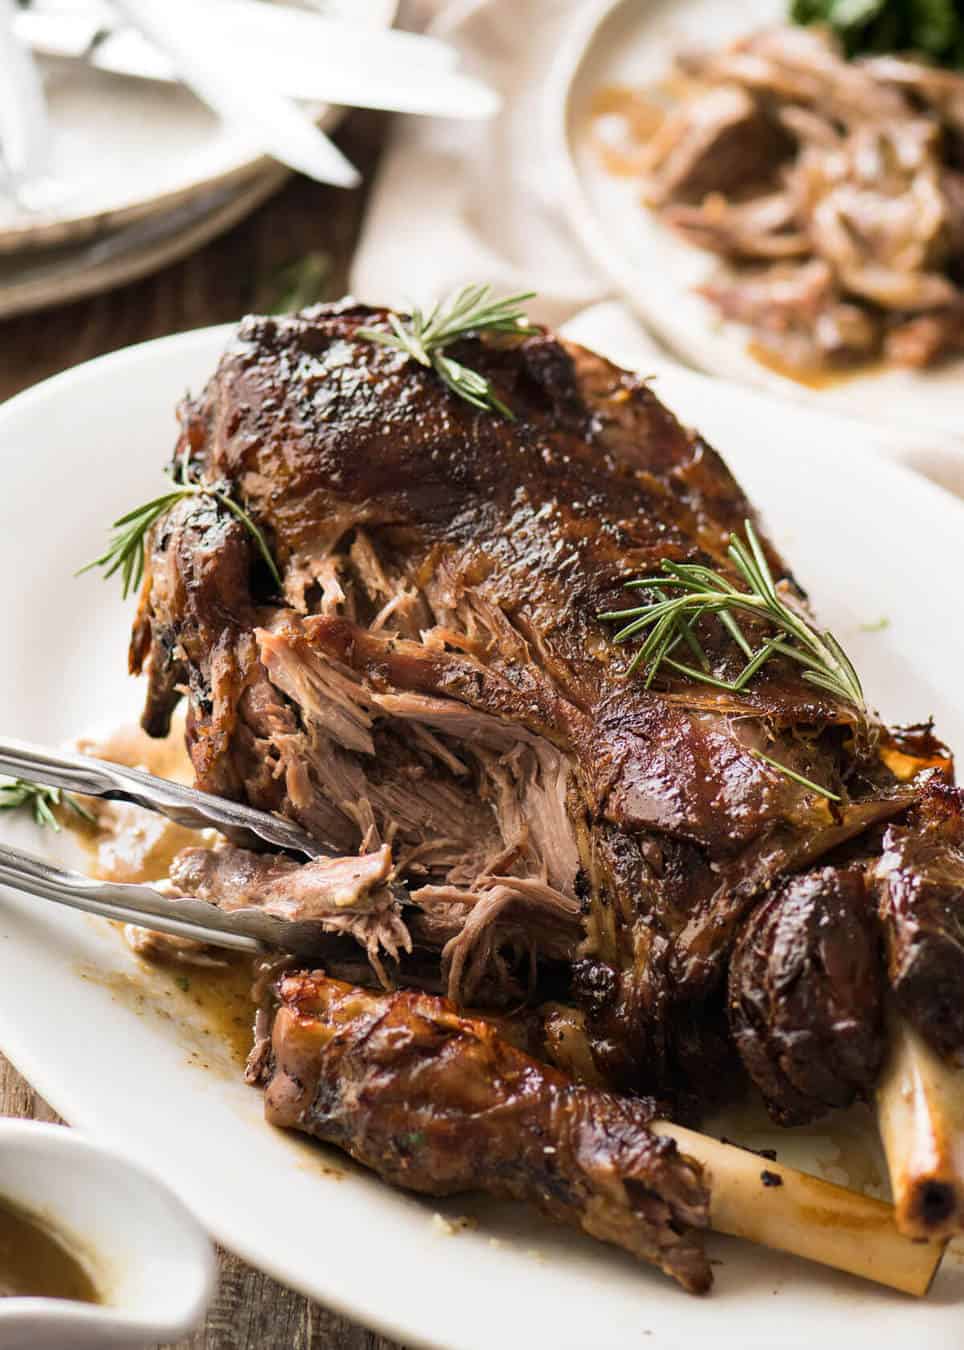 A Slow Roasted Lamb Leg on a white platter with some of the tender meat pulled off with tongs. Garnished with sprigs of rosemary.